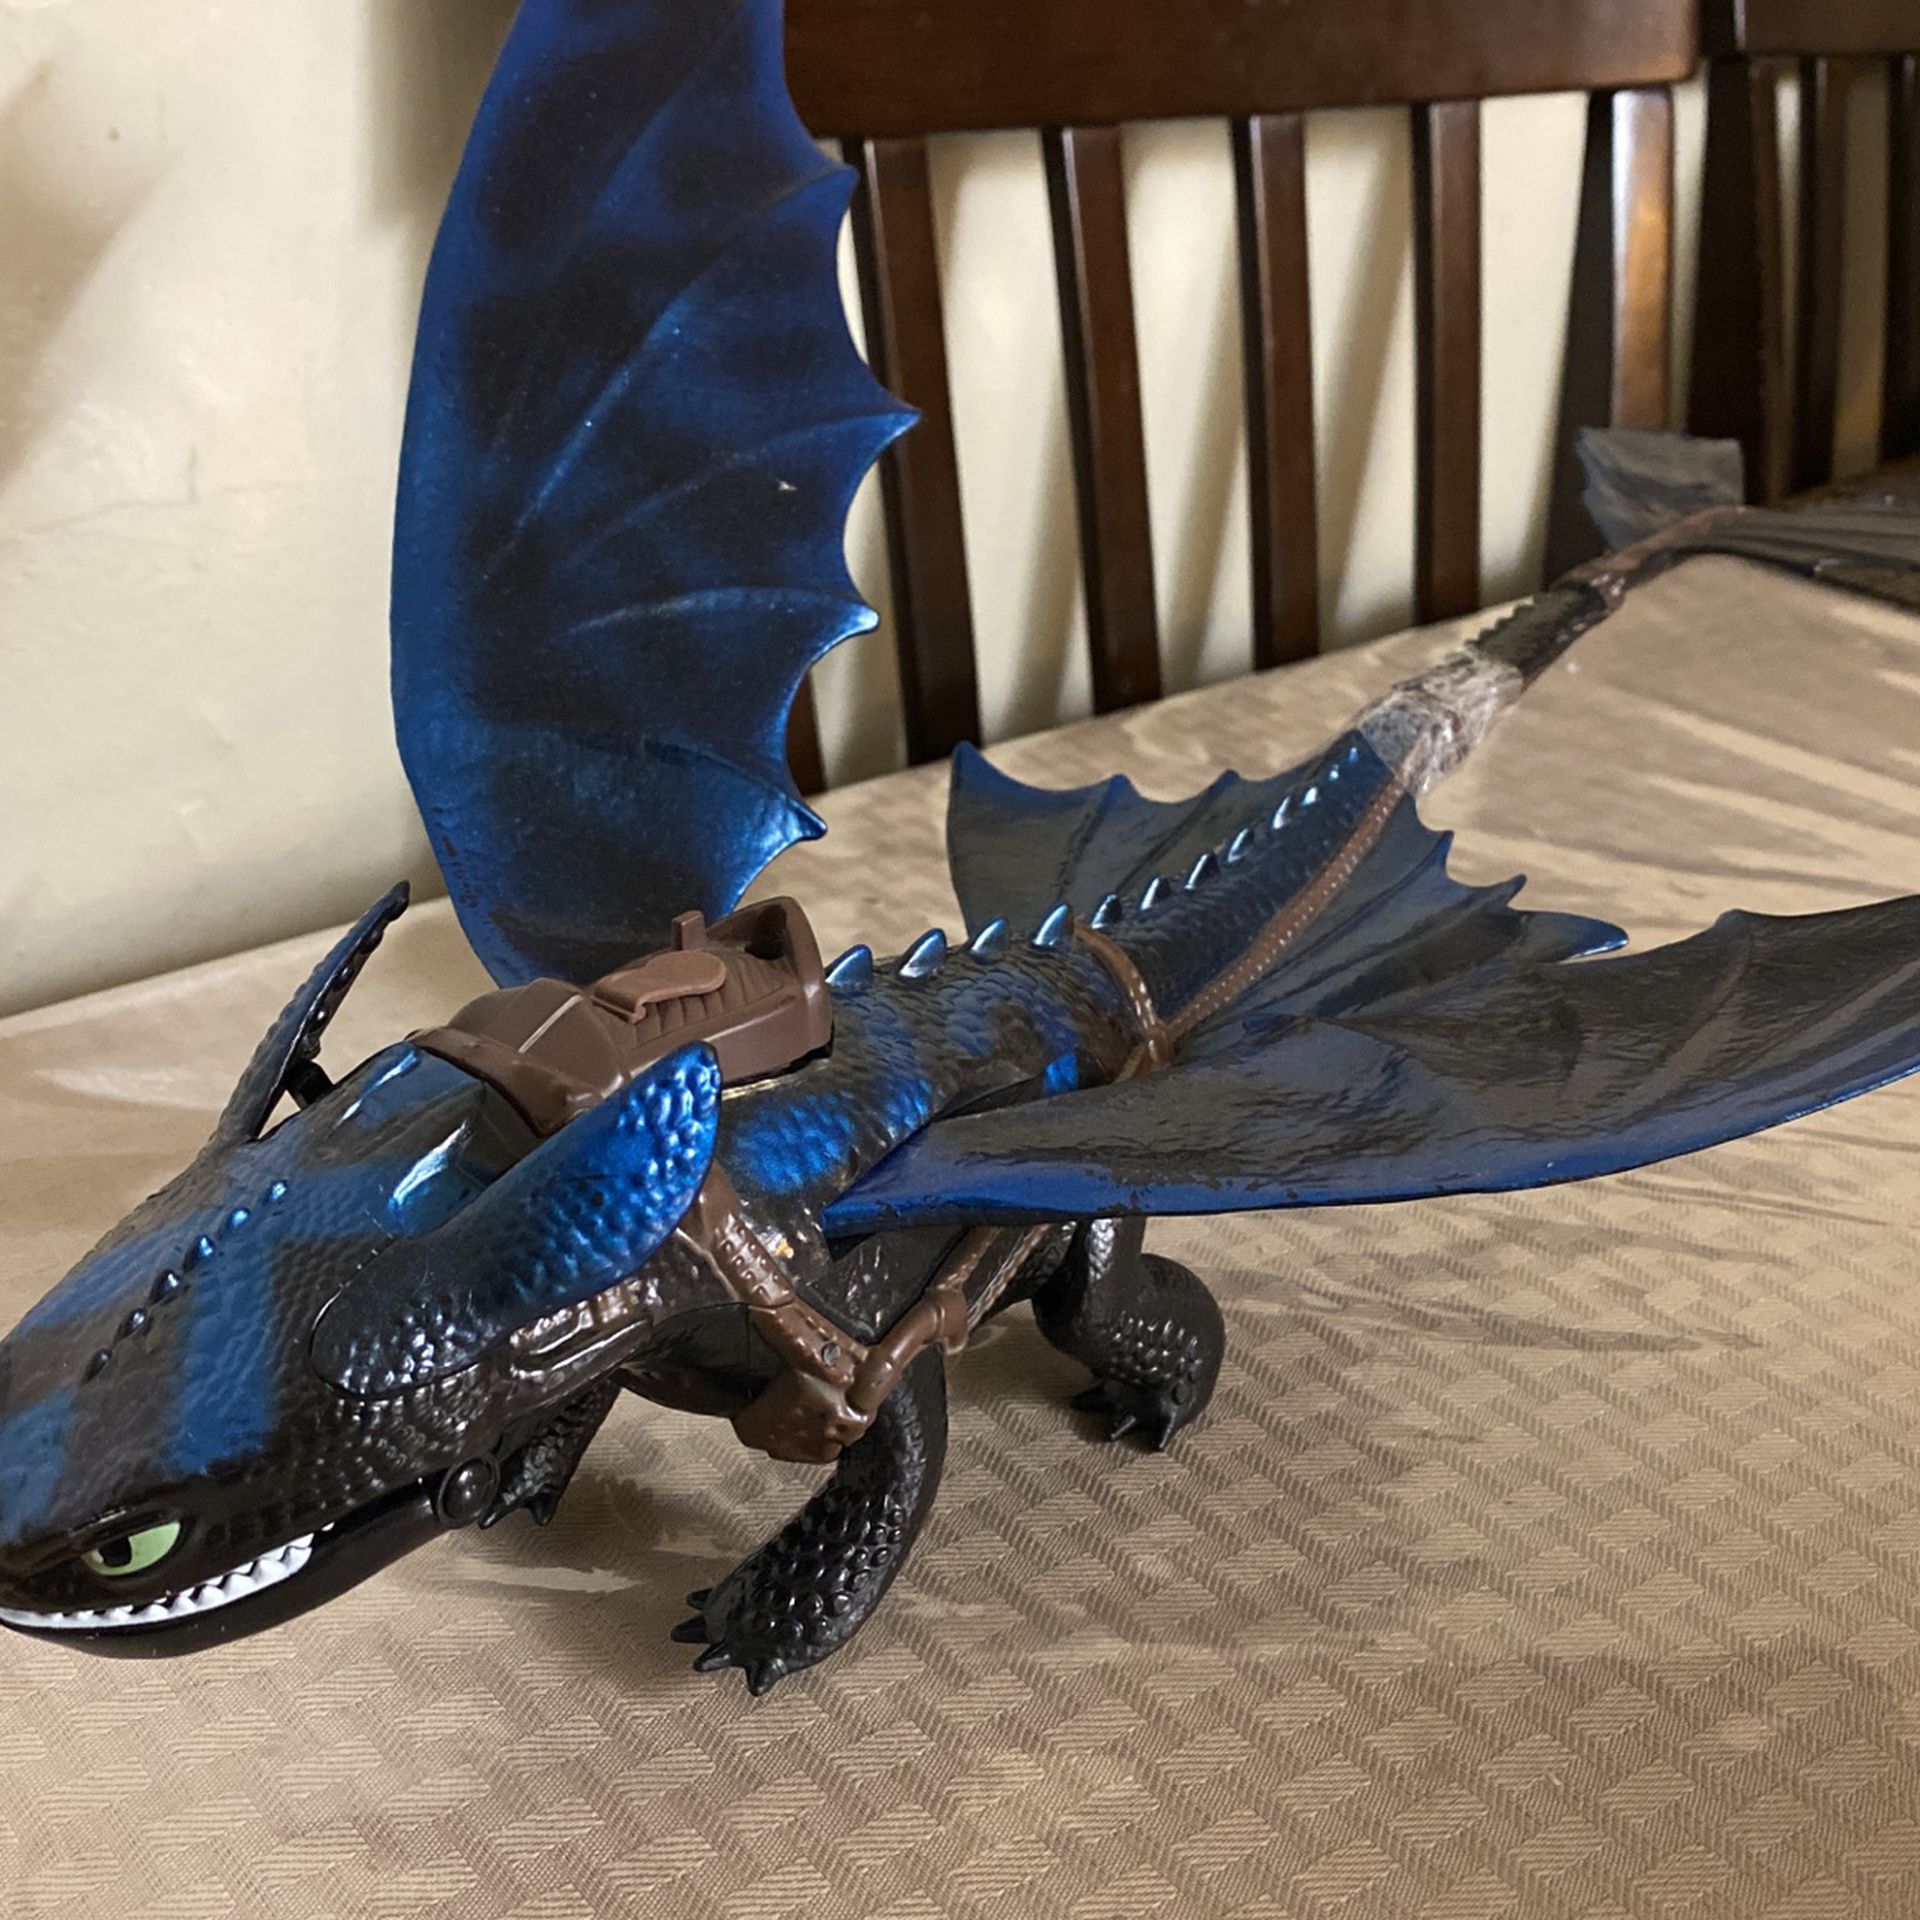 Giant Fire Breathing Toothless Action Figure 20”